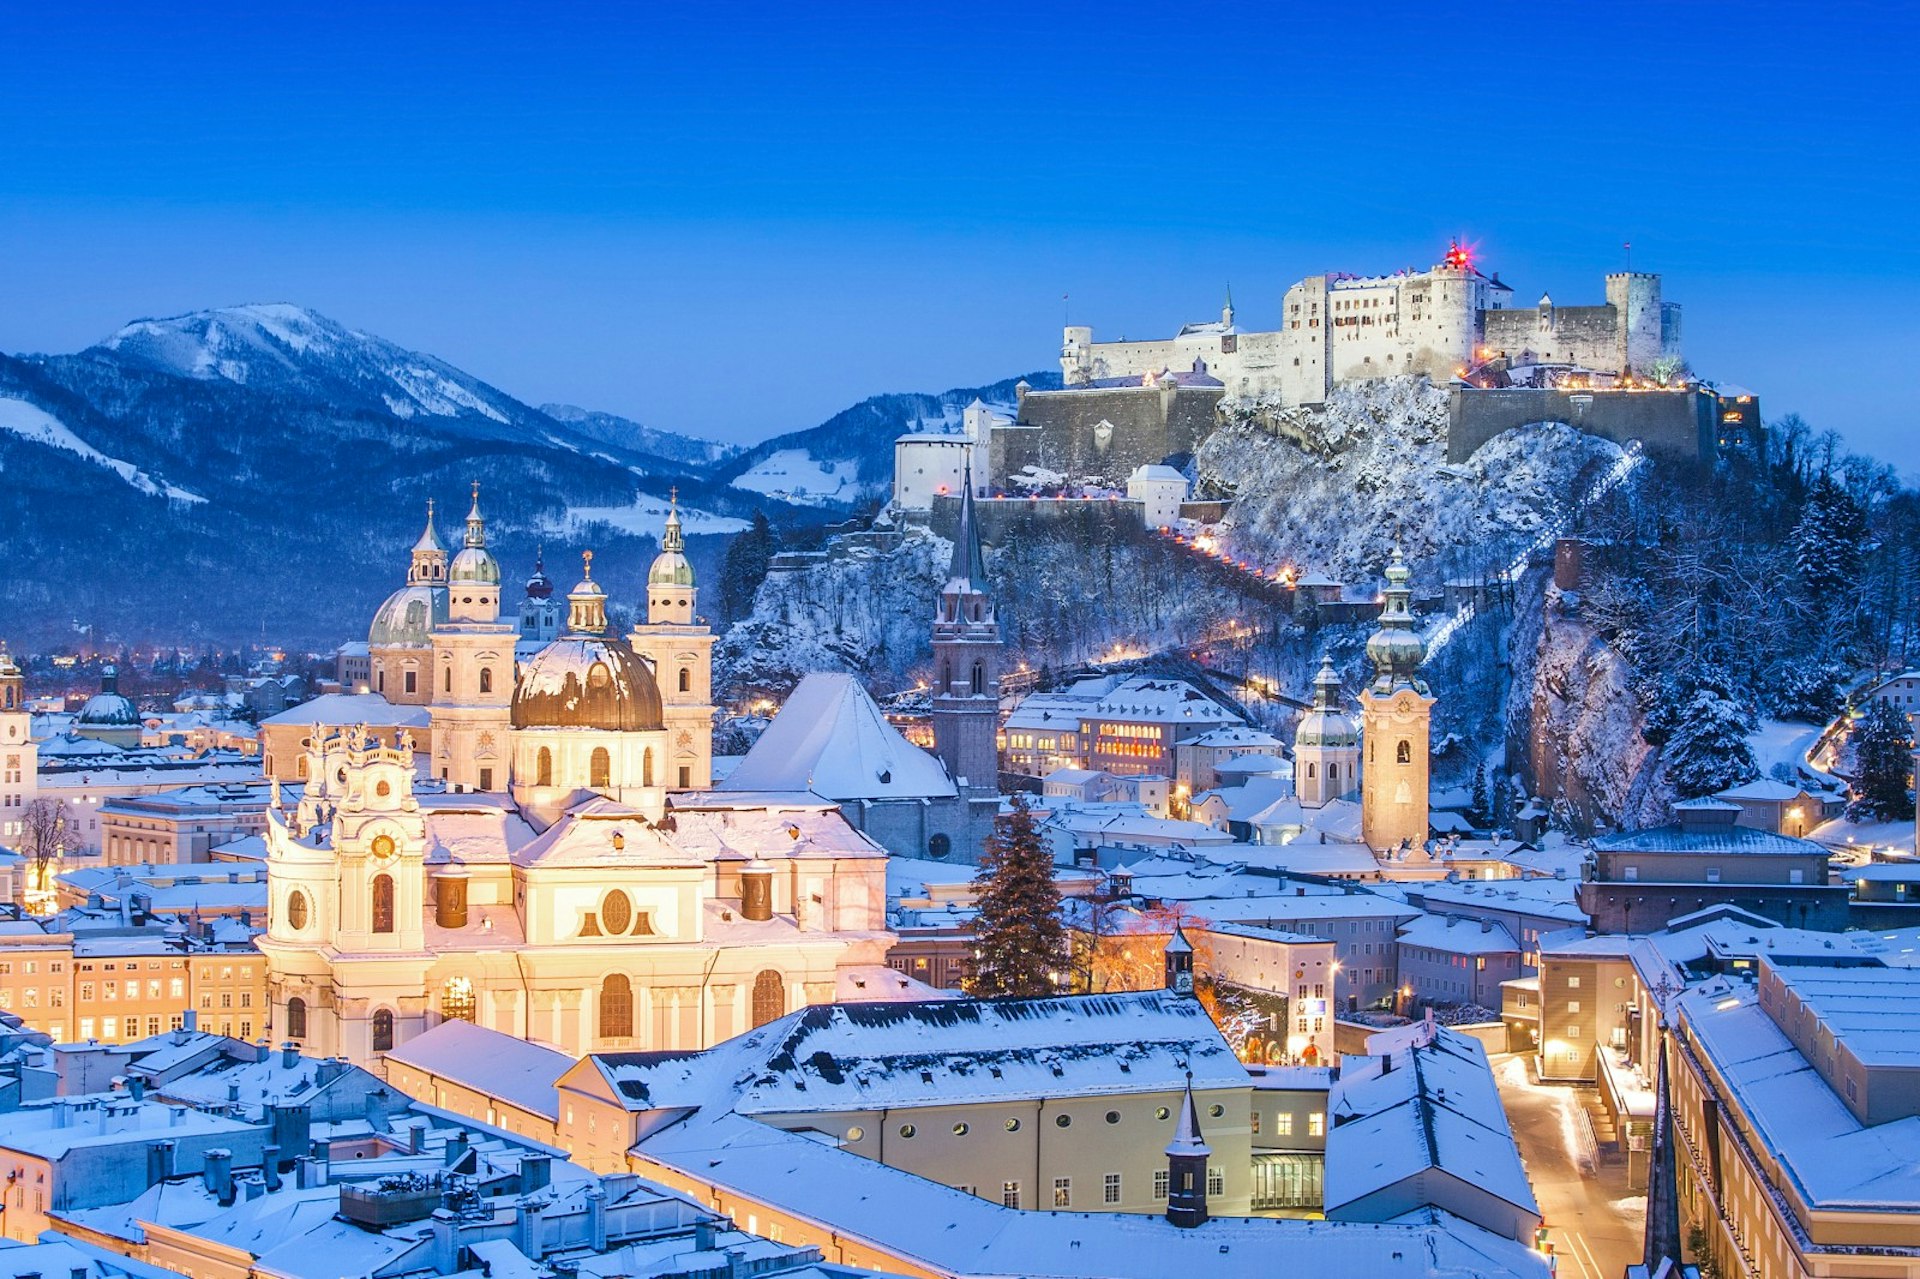 Salzburg Cathedral and Festung Hohensalzburg covered in snow and aglow under evening streetlights